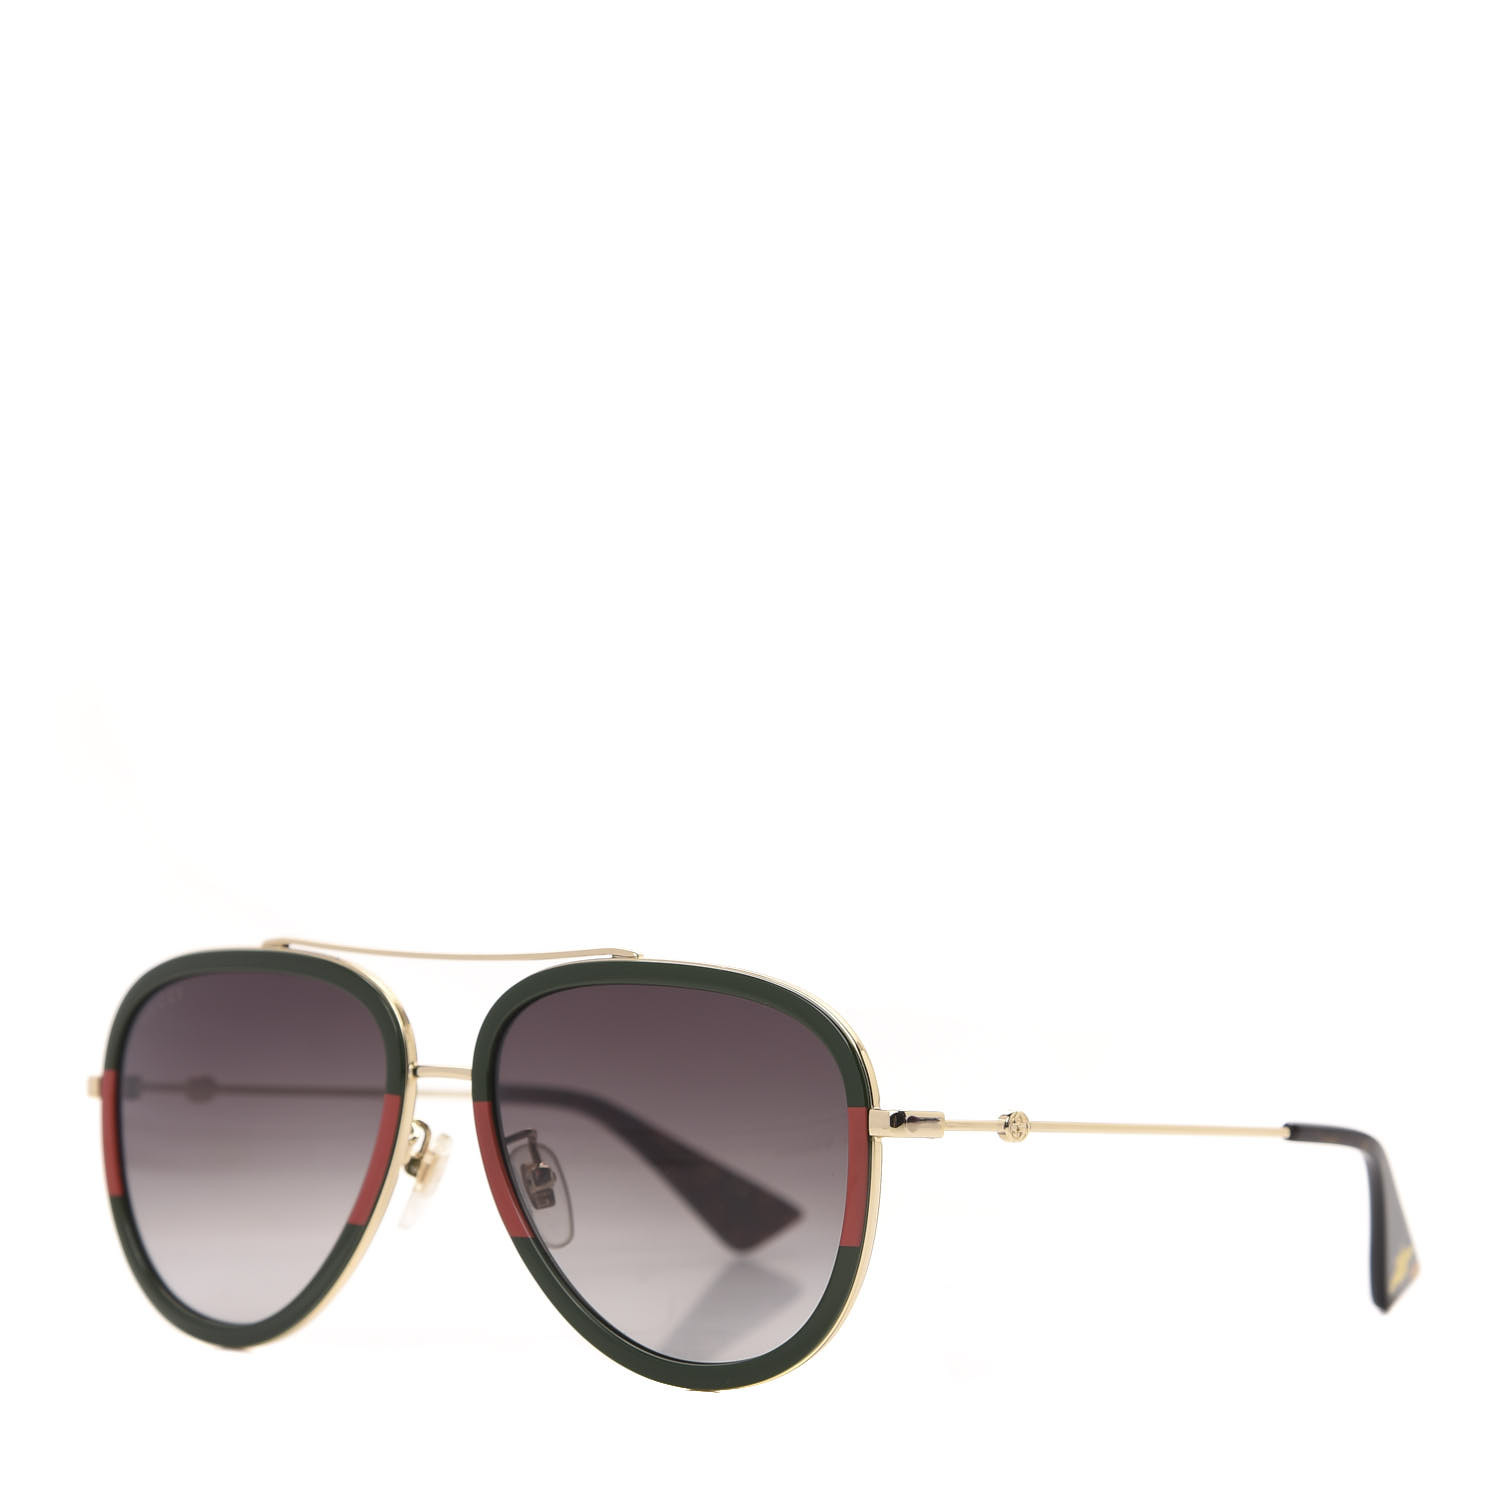 gucci aviator sunglasses green and red